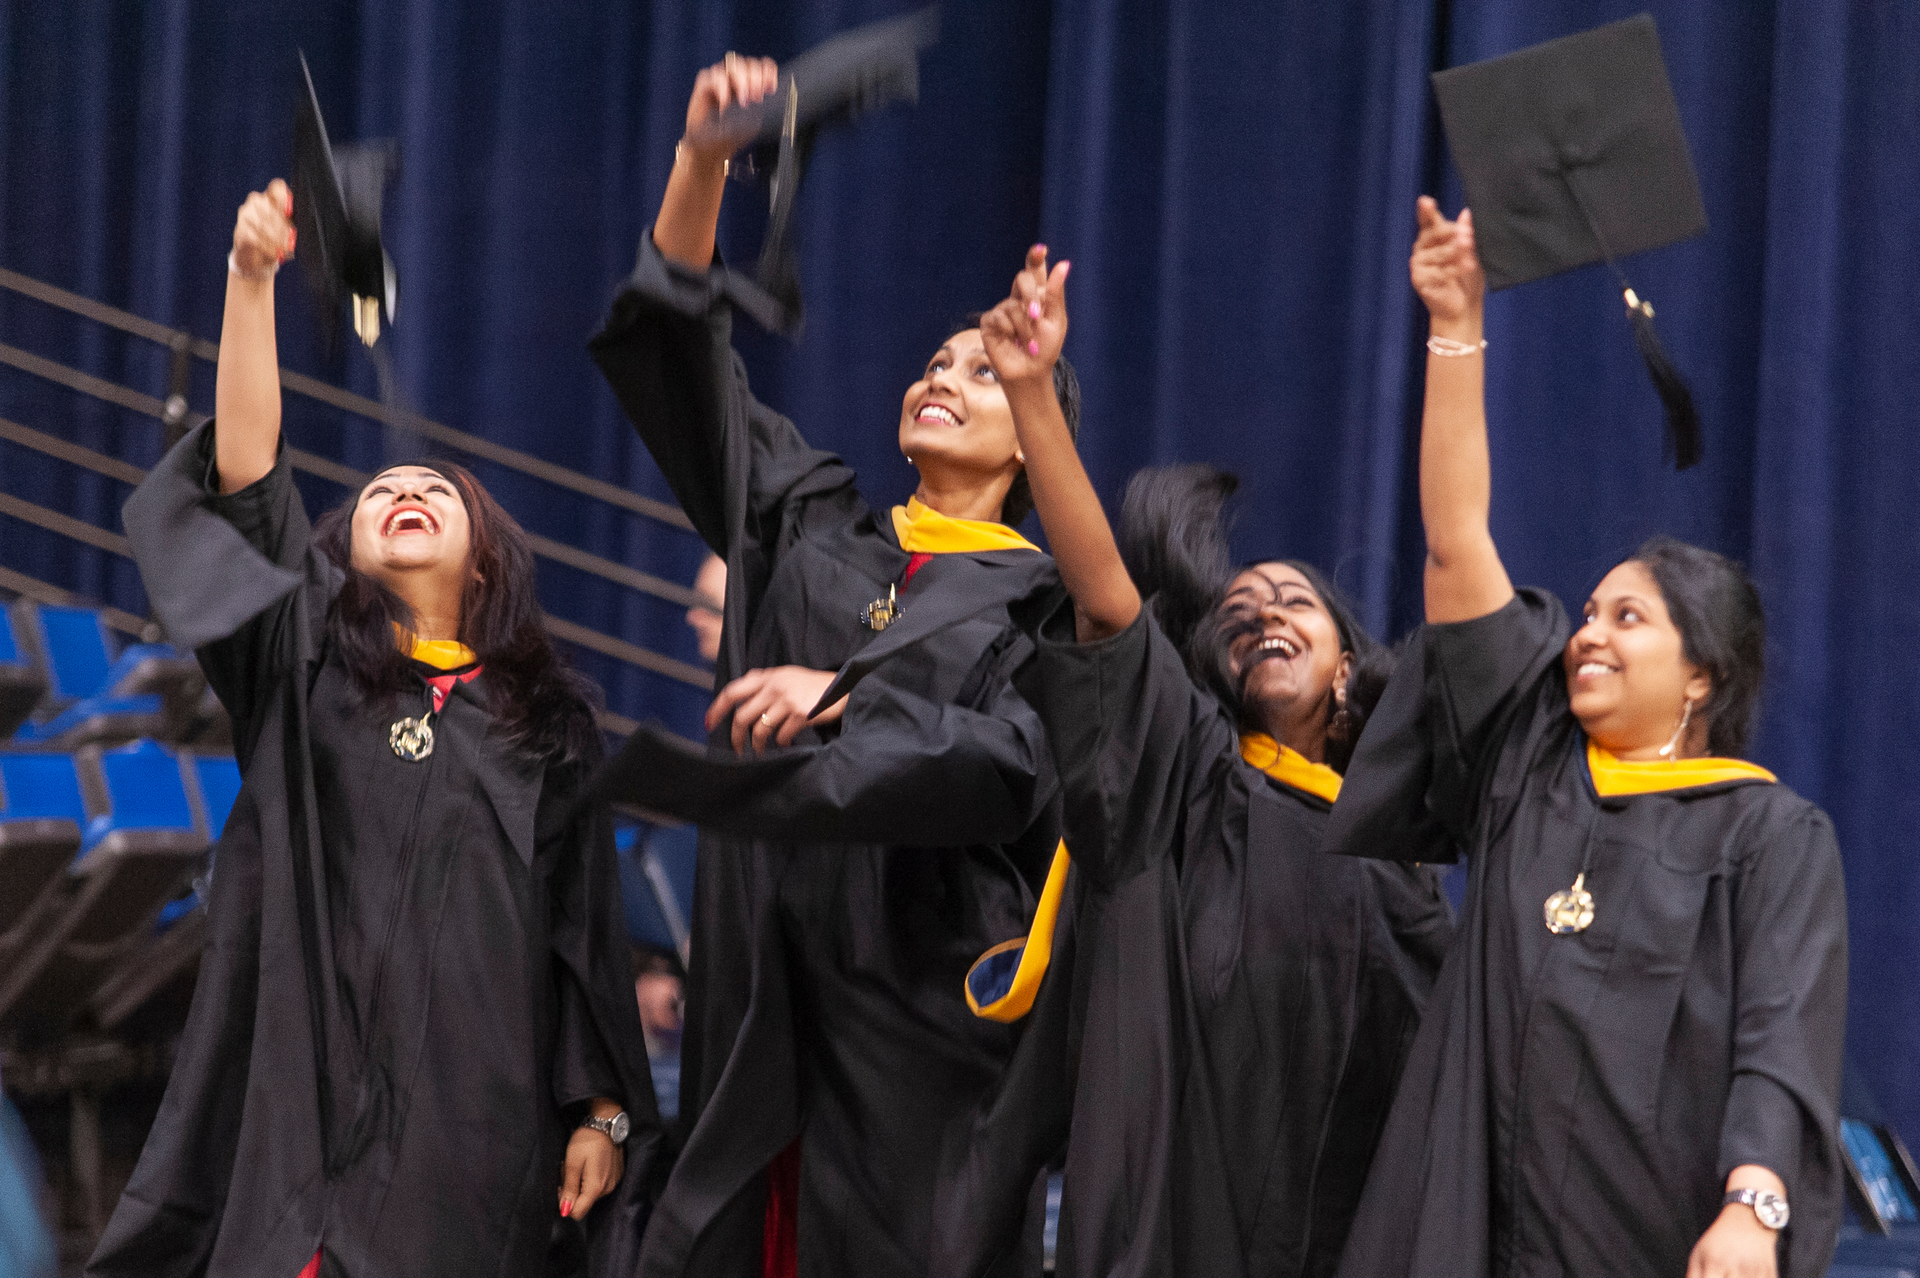 A group of students throw their caps in the air at a graduation ceremony